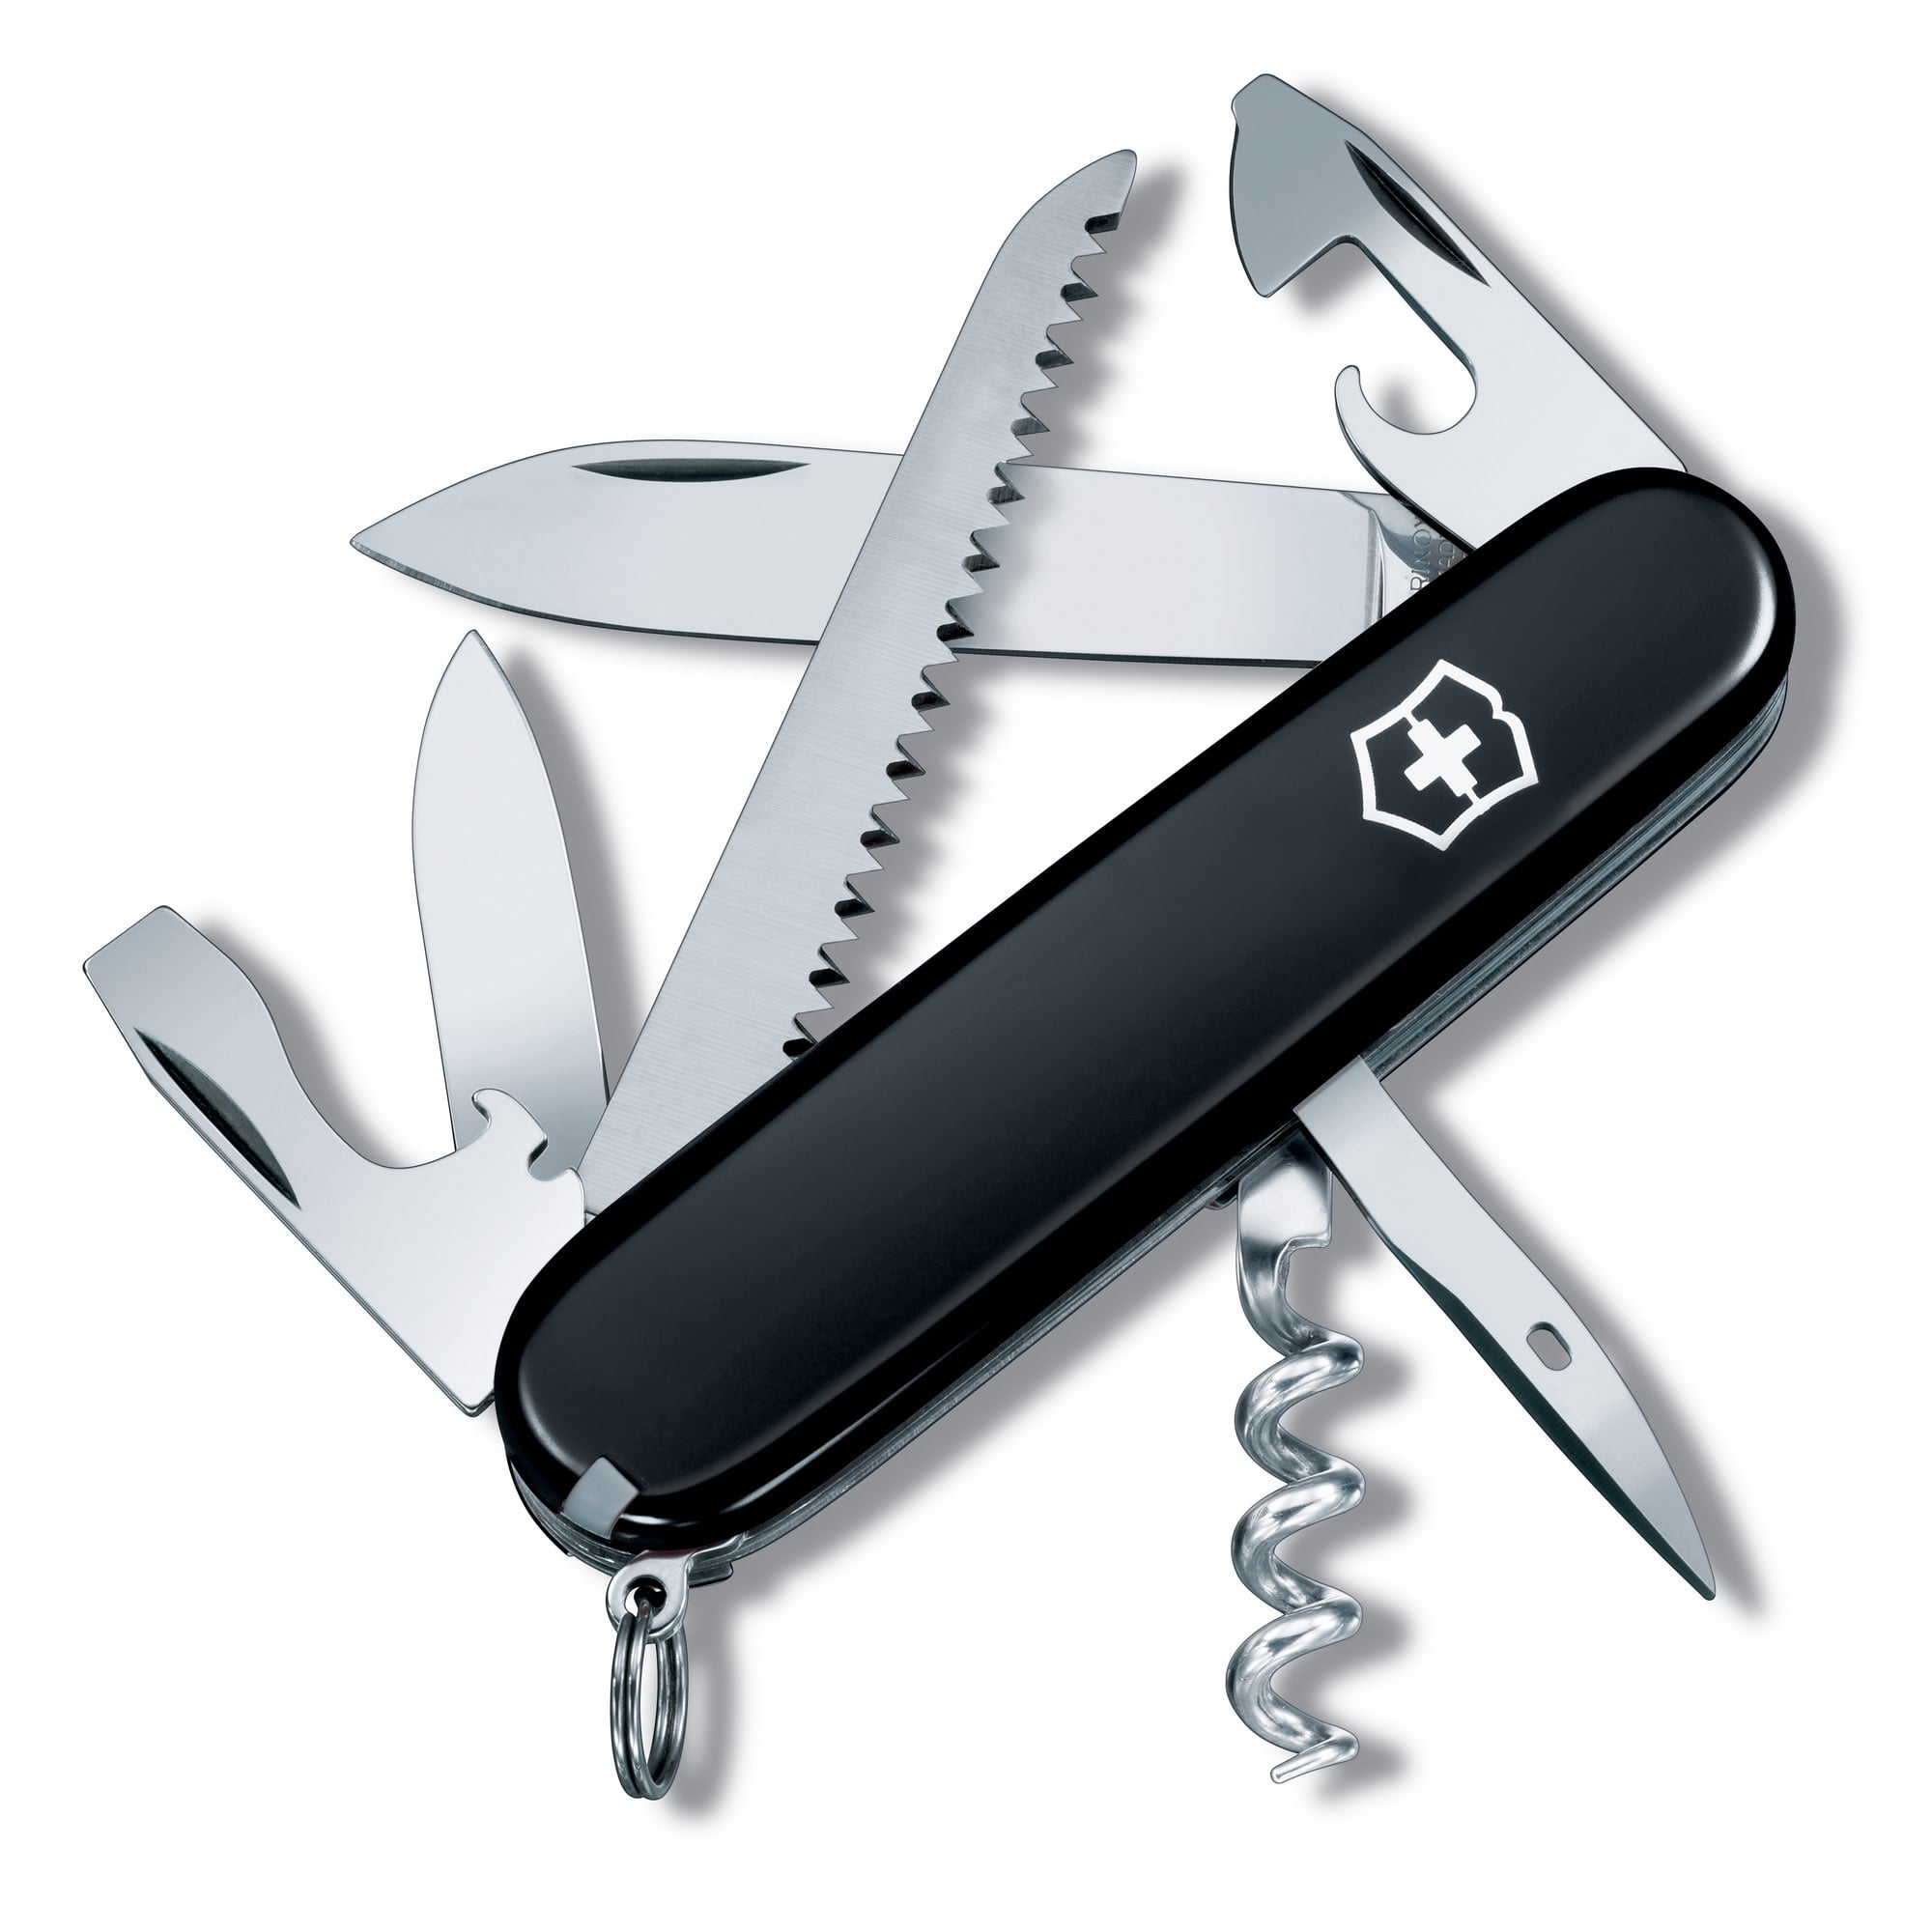 Victorinox Rescue Tool 13 Function Black Pocket Knife with Pouch